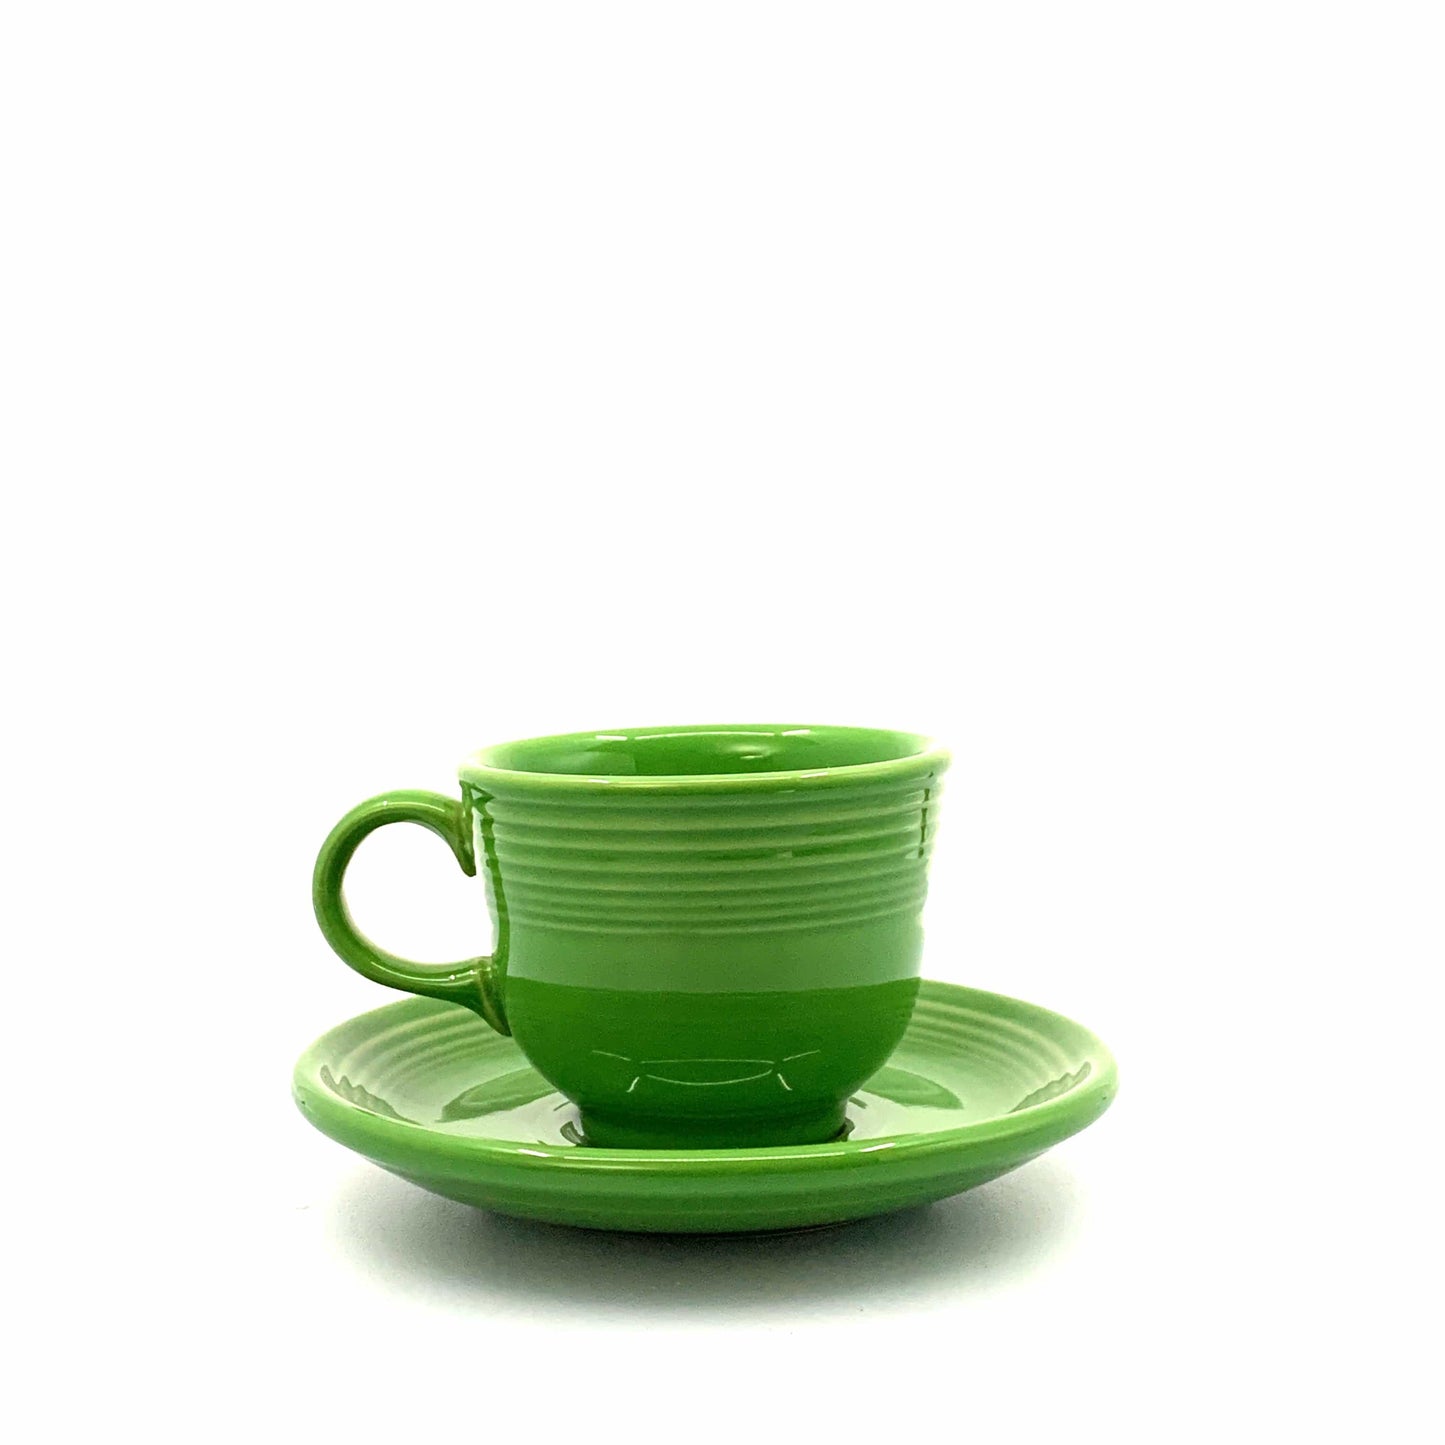 Fiesta Green Replacement Tea Coffee Cup and Saucer Set Homer Laughlin Co USA.